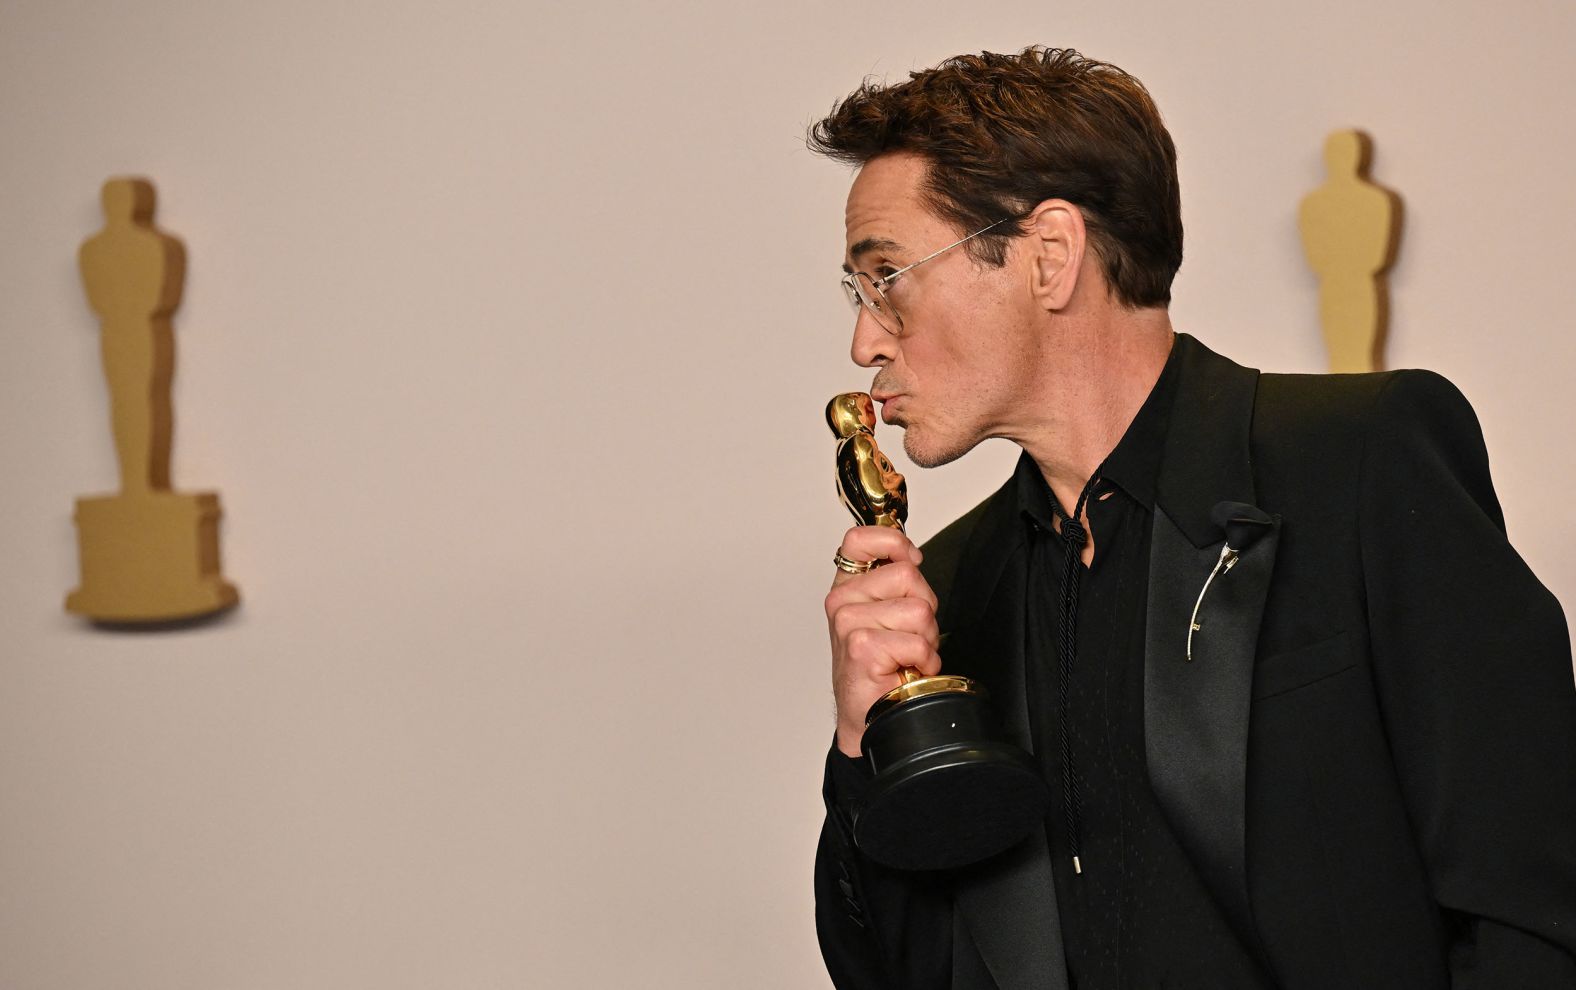 Robert Downey Jr. poses in the press room with the Oscar he won for best supporting actor. "I'd like to thank my terrible childhood and the Academy," he said in his acceptance speech. "In that order." 